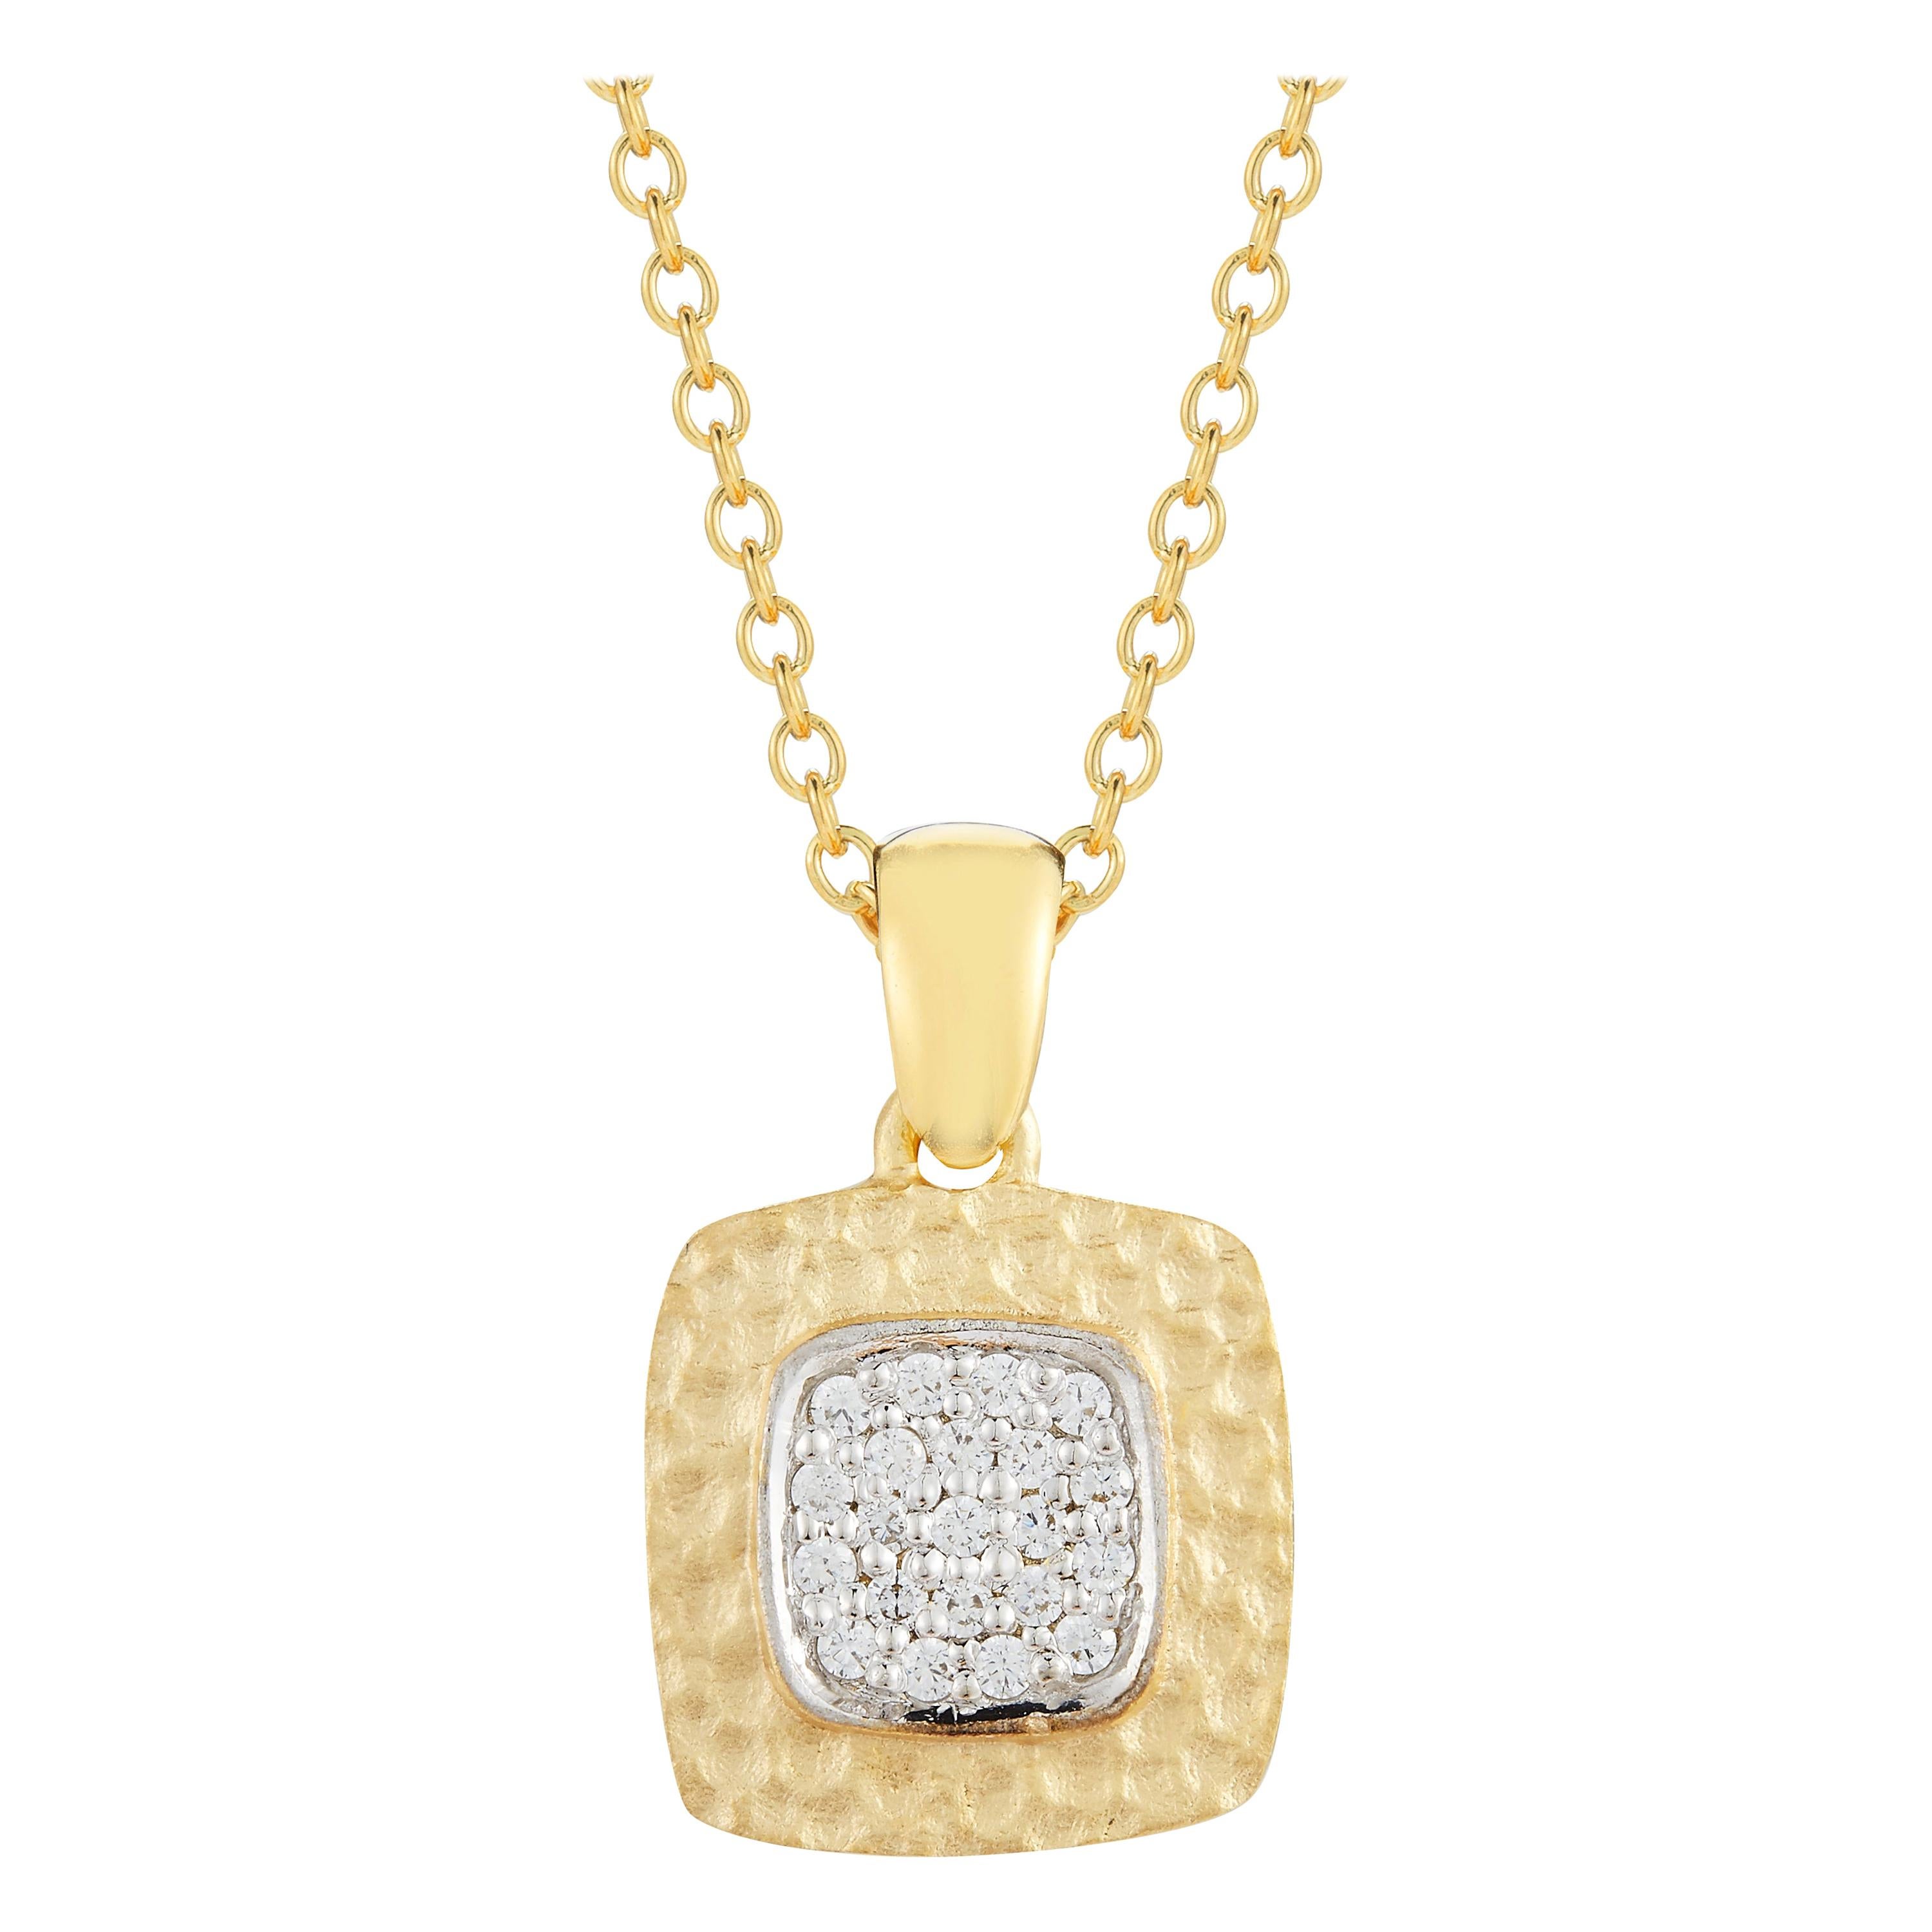 Handcrafted 14 Karat Yellow Gold Square-Shaped Pendant